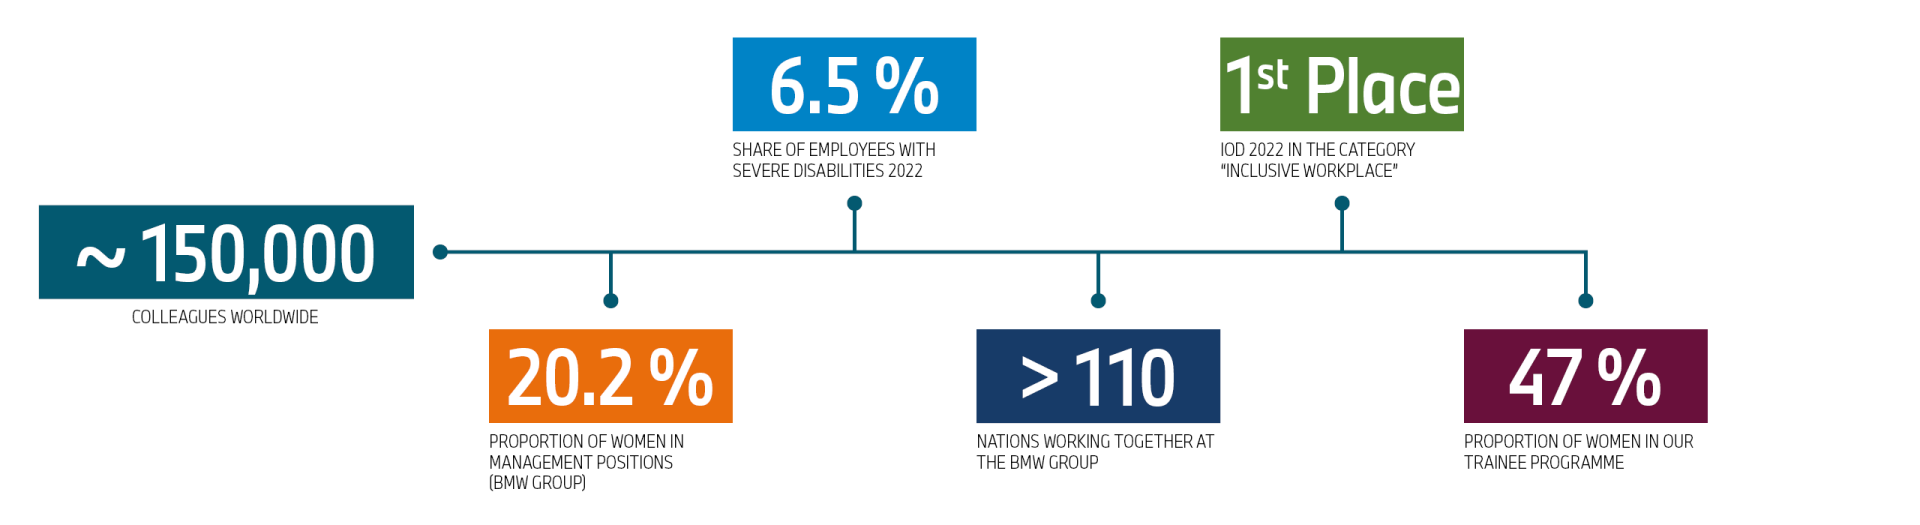 This graphic shows some facts about diversity at the BMW Group.